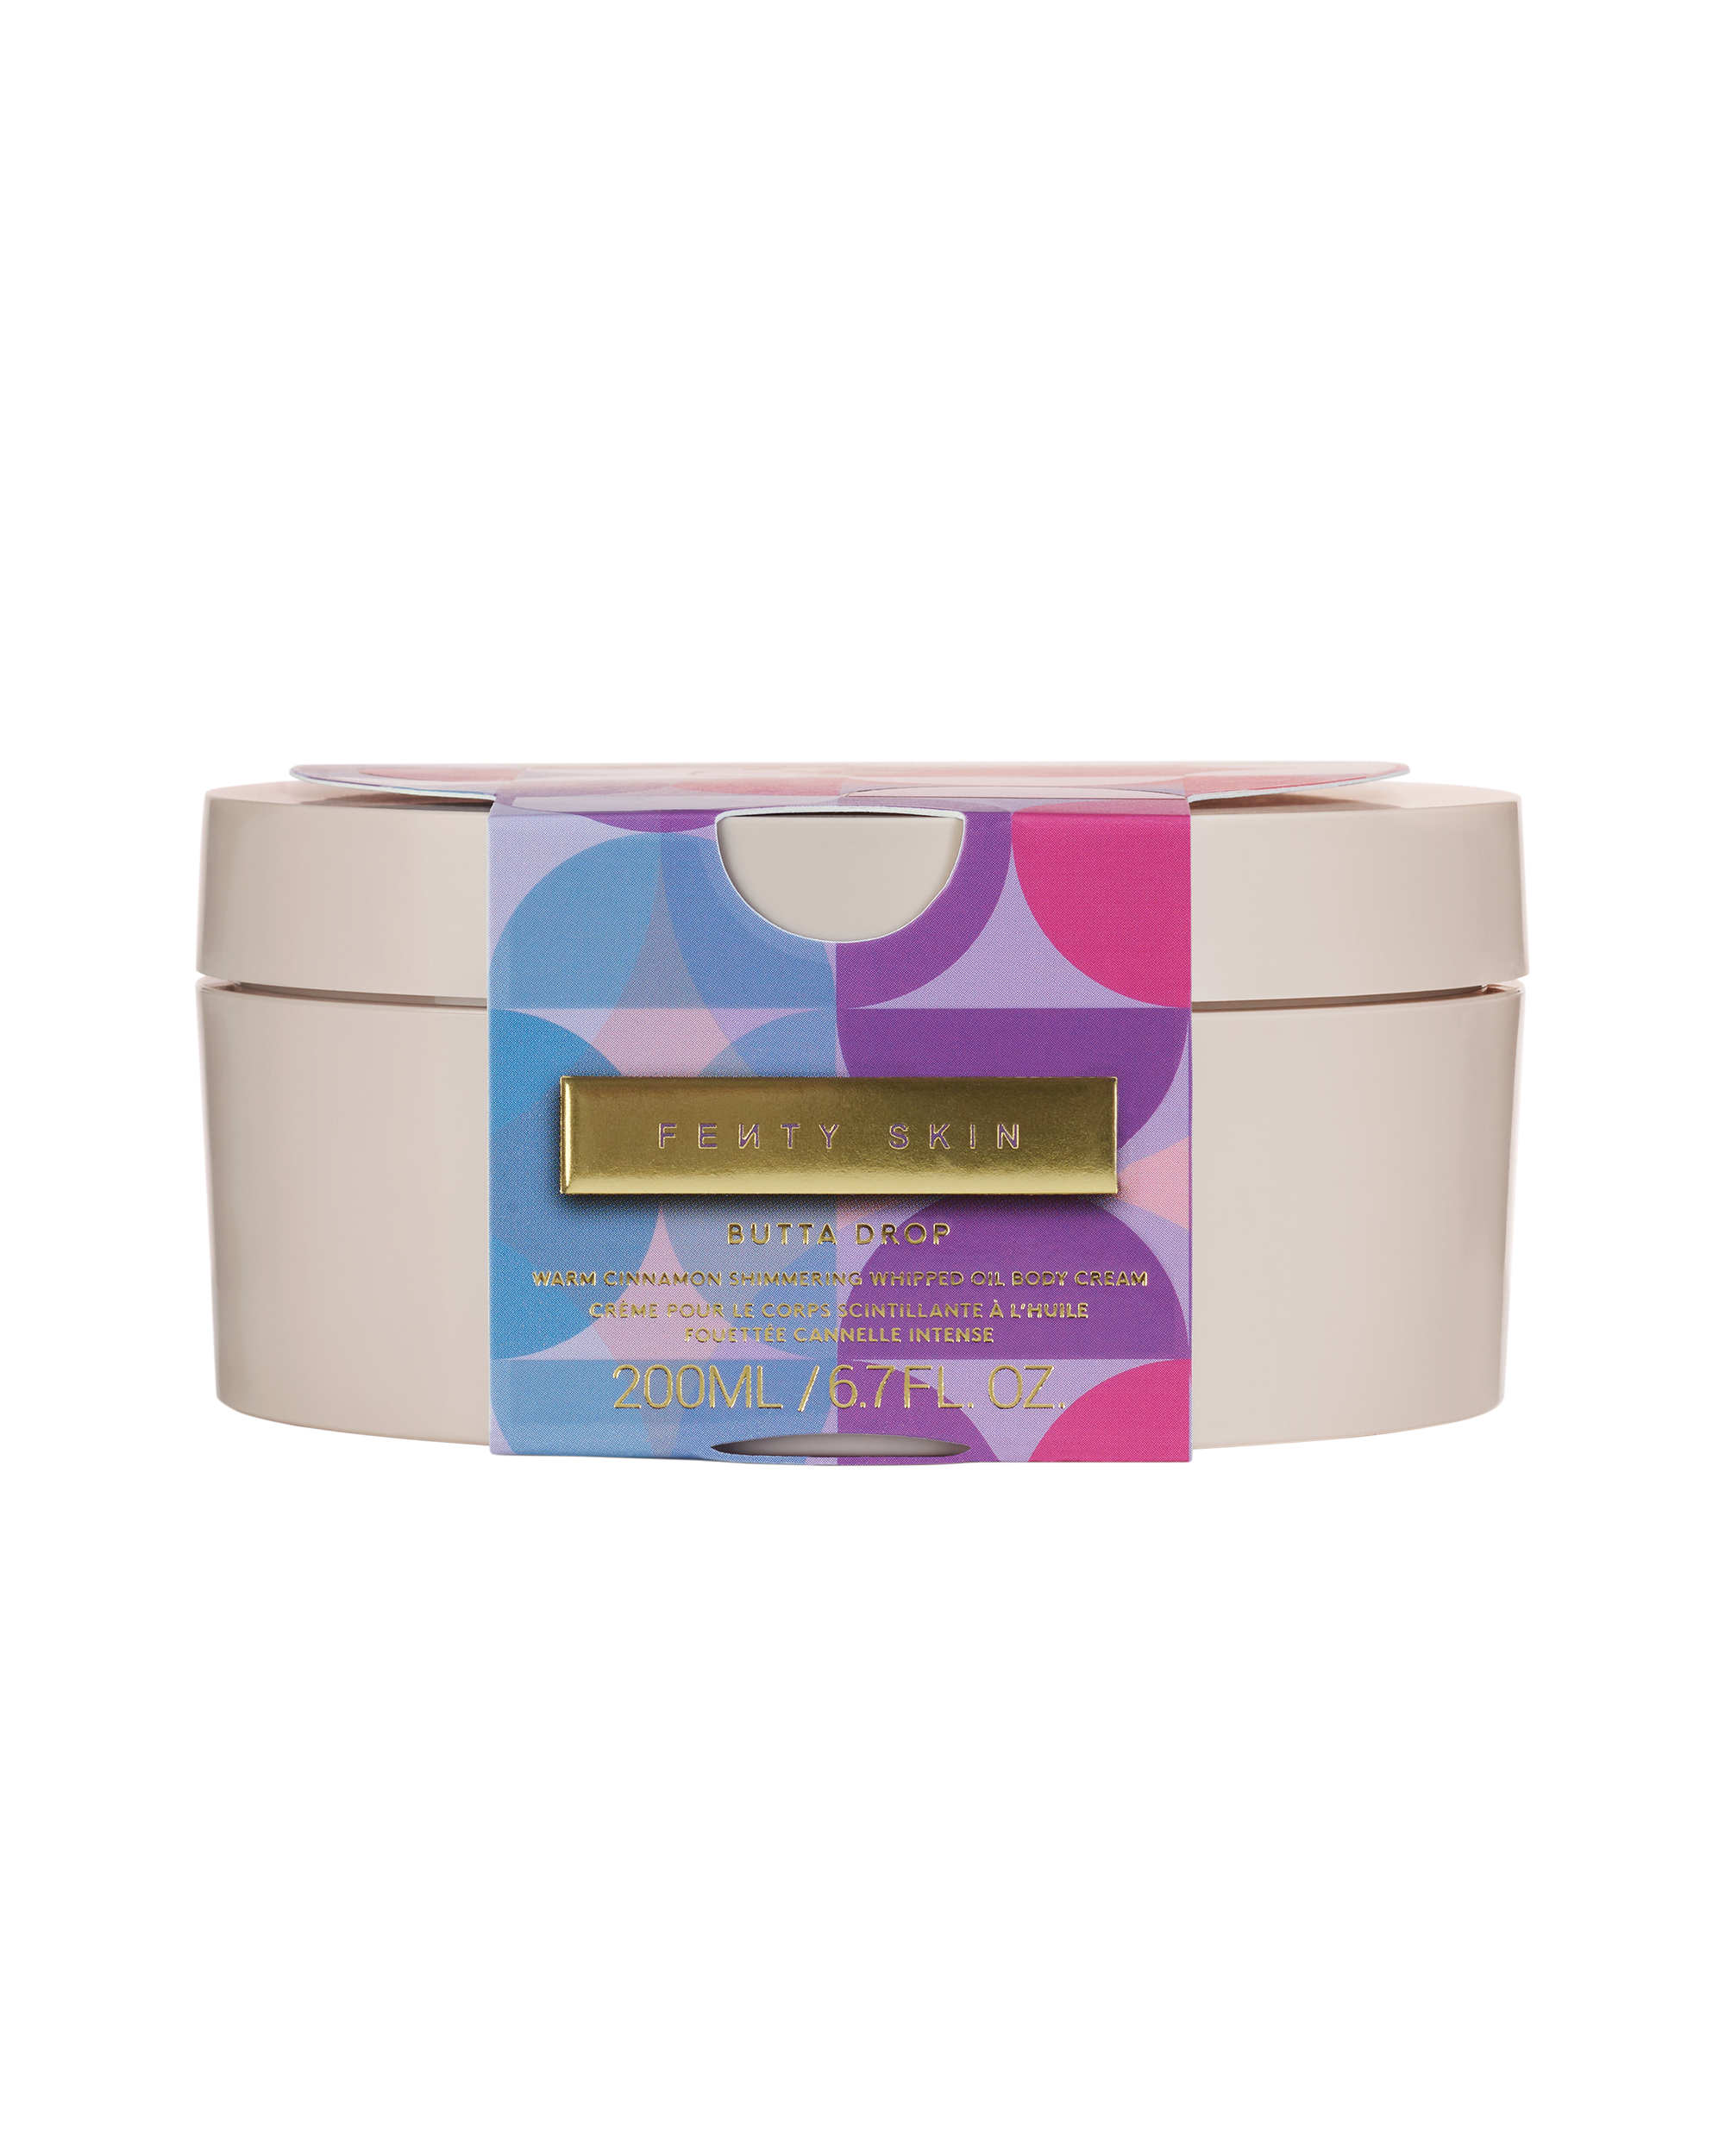 Butta Drop Shimmering Whipped Oil Body Cream